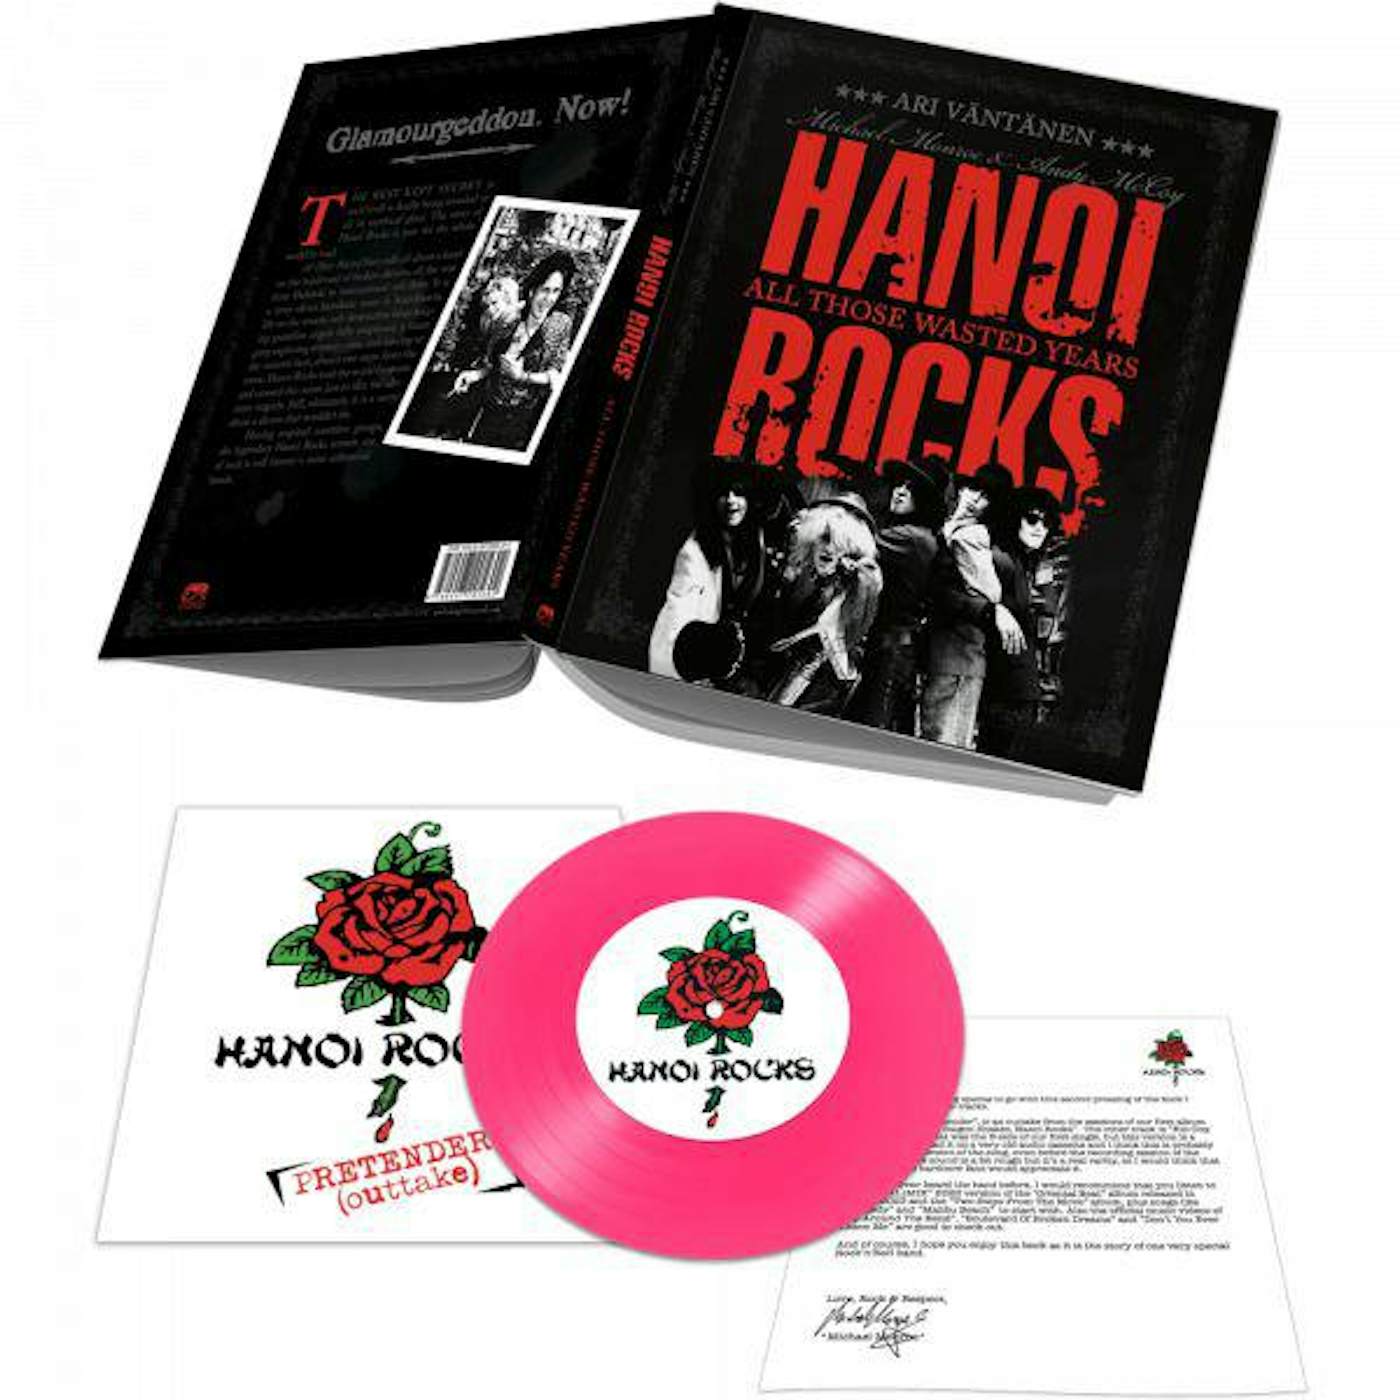 Hanoi Rocks All Those Wasted Years (Pink/With Book) Vinyl Record